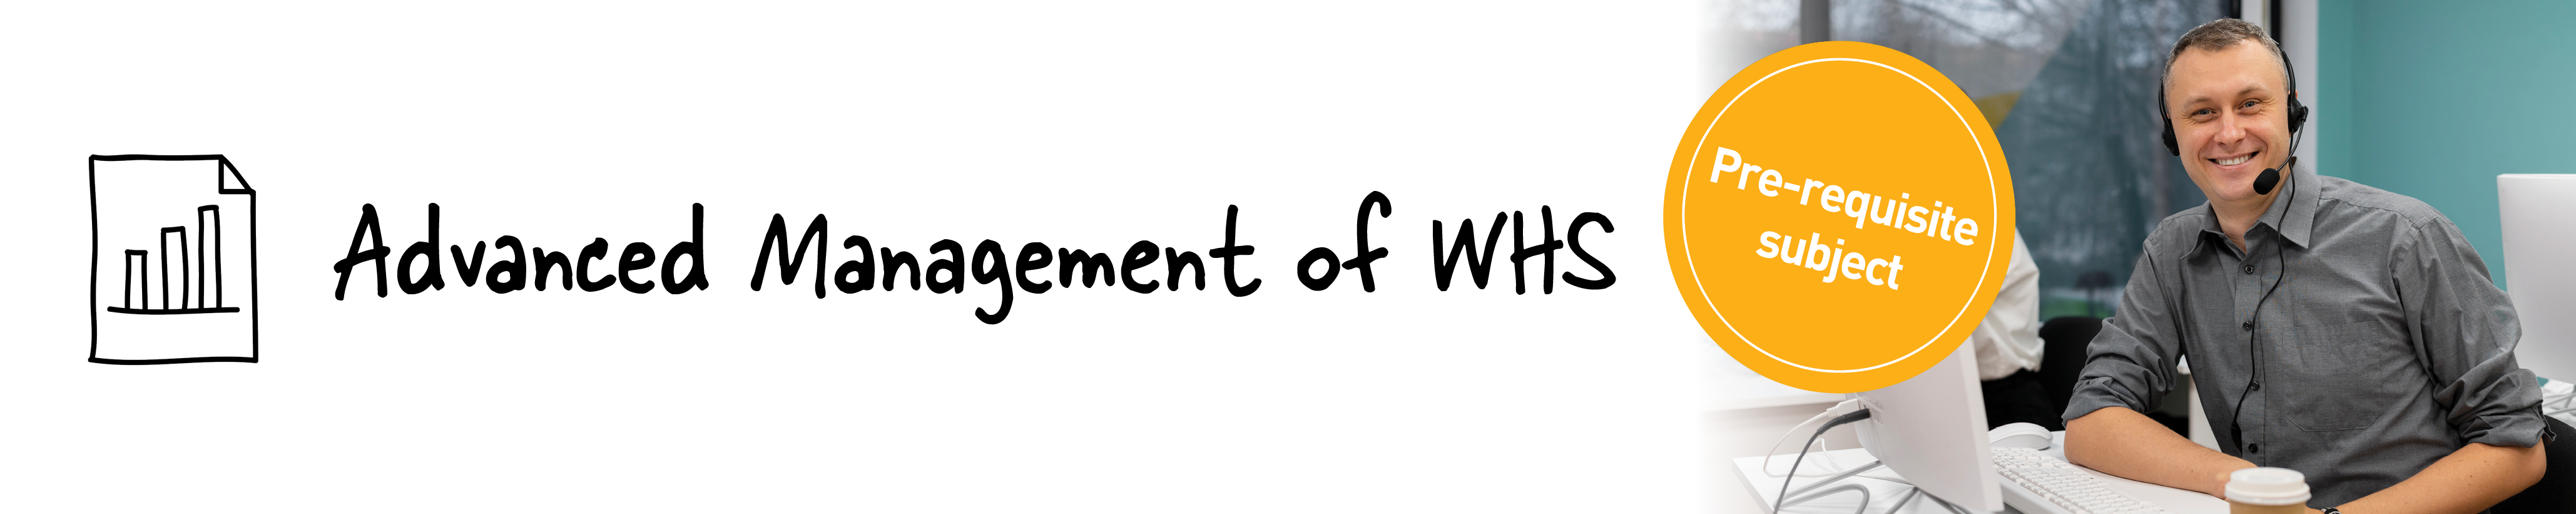 Advanced Management of WHS